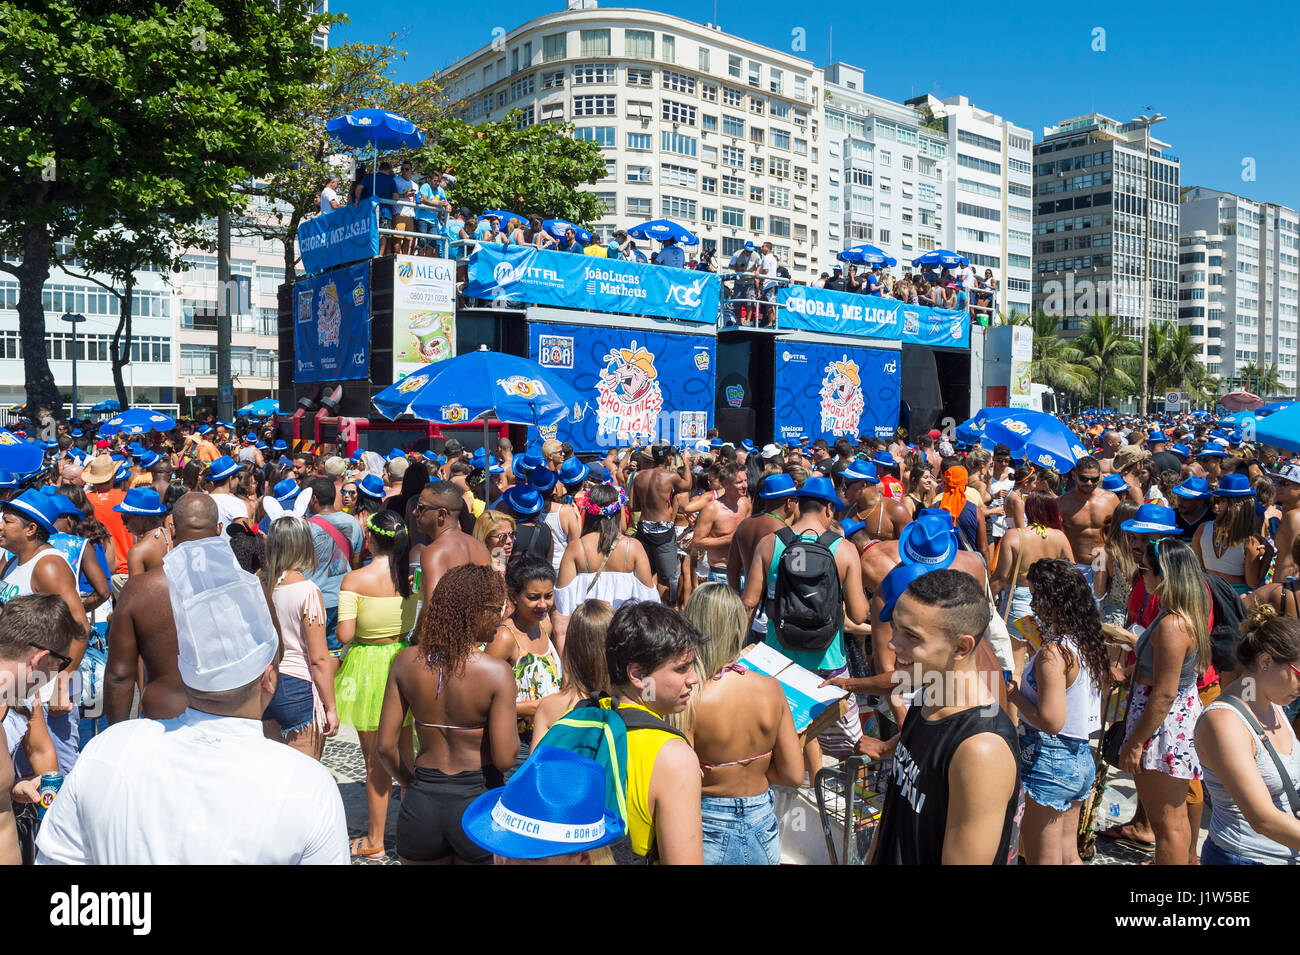 RIO DE JANEIRO - FEBRUARY 19, 2017: Crowds of young people gather in Copacabana to celebrate a morning street party during Carnival. Stock Photo